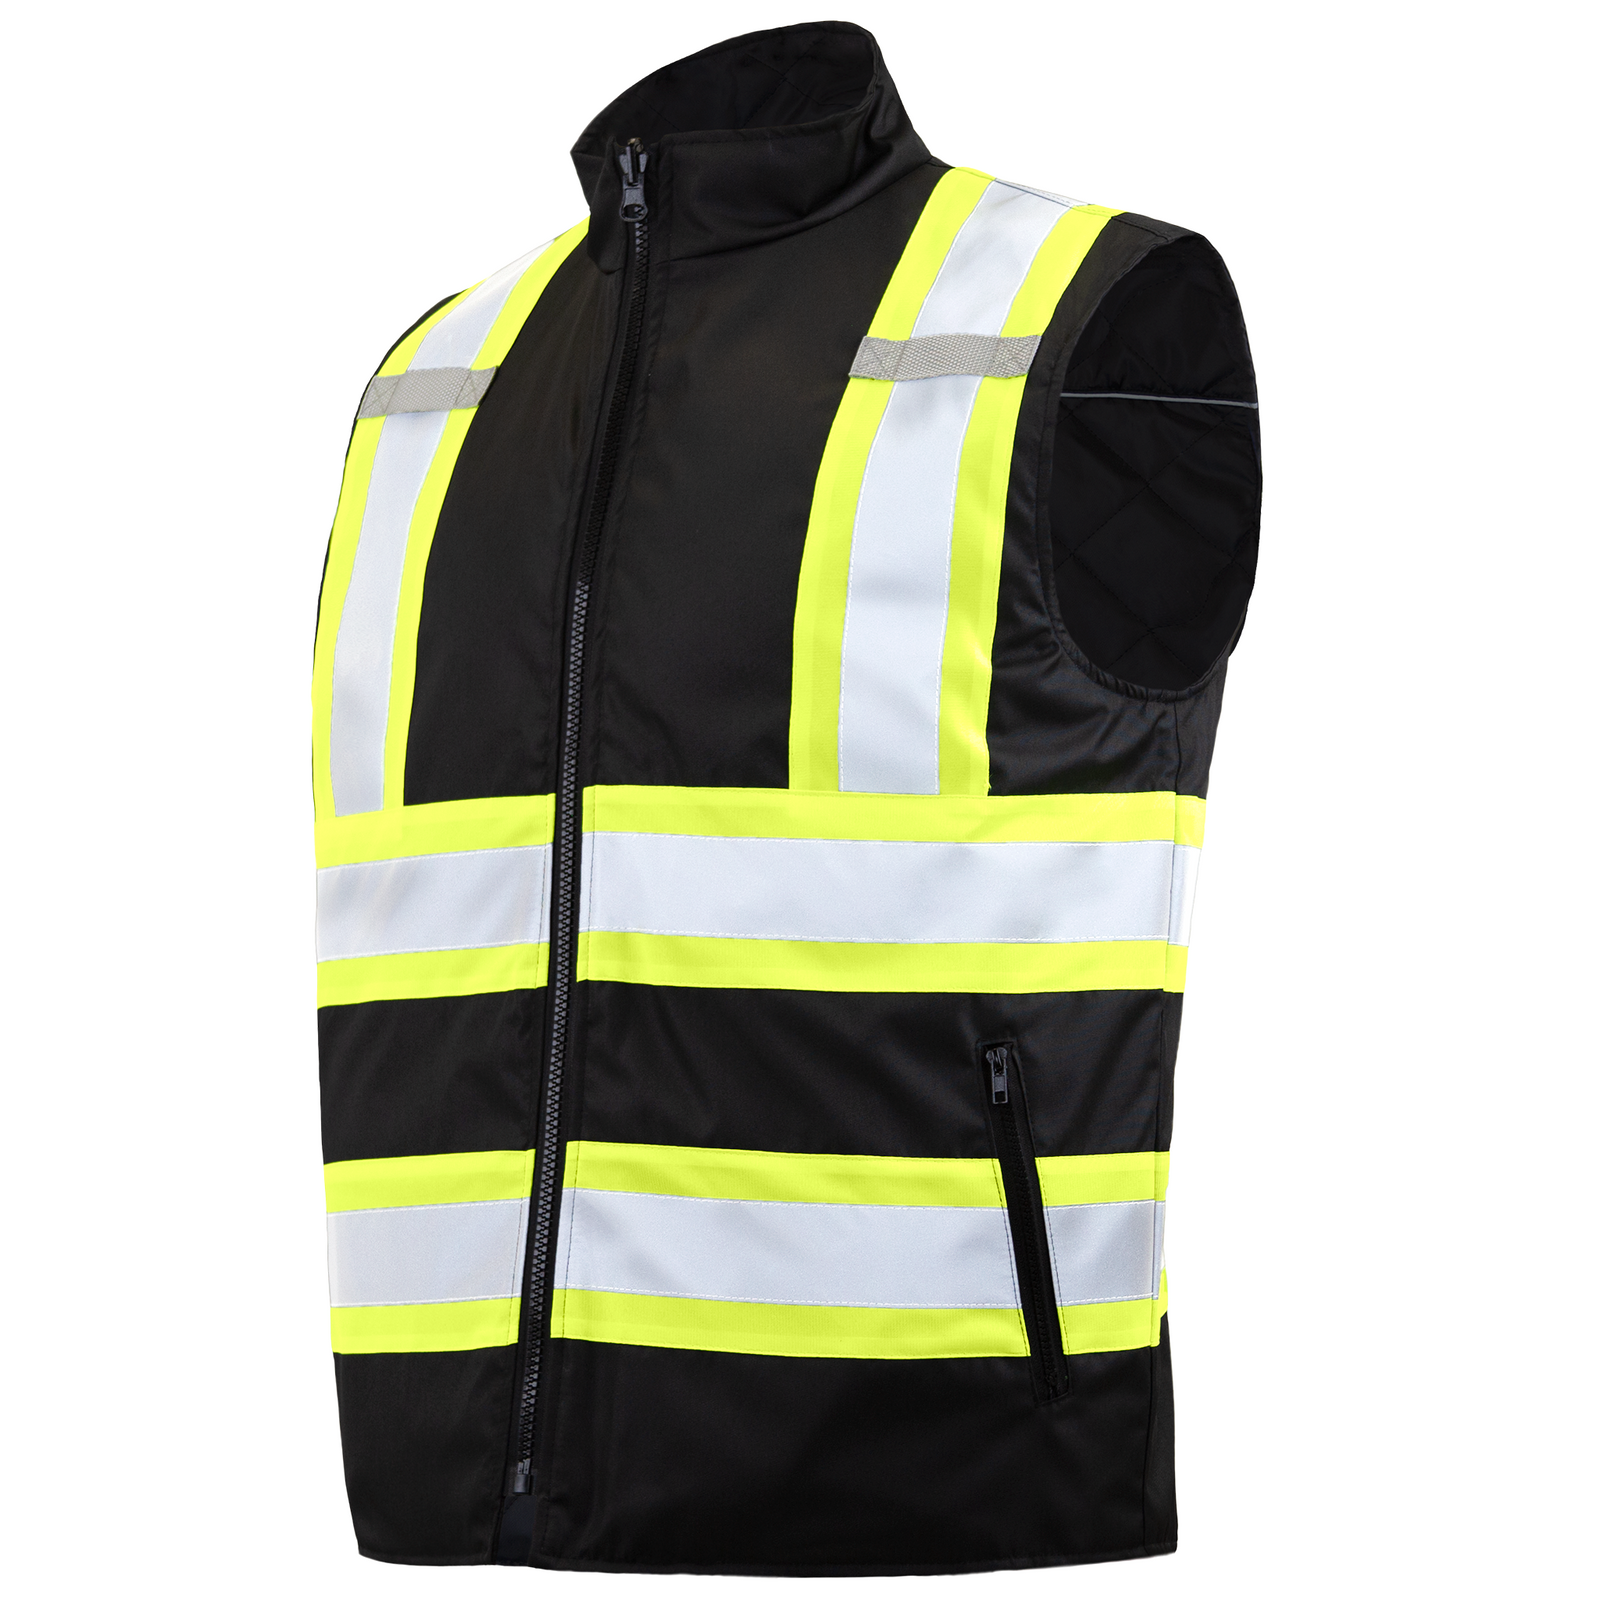 Diagonal view of the black JORESTECH vi-vis X on back reversible insulated waterproof safety vest with reflective strips